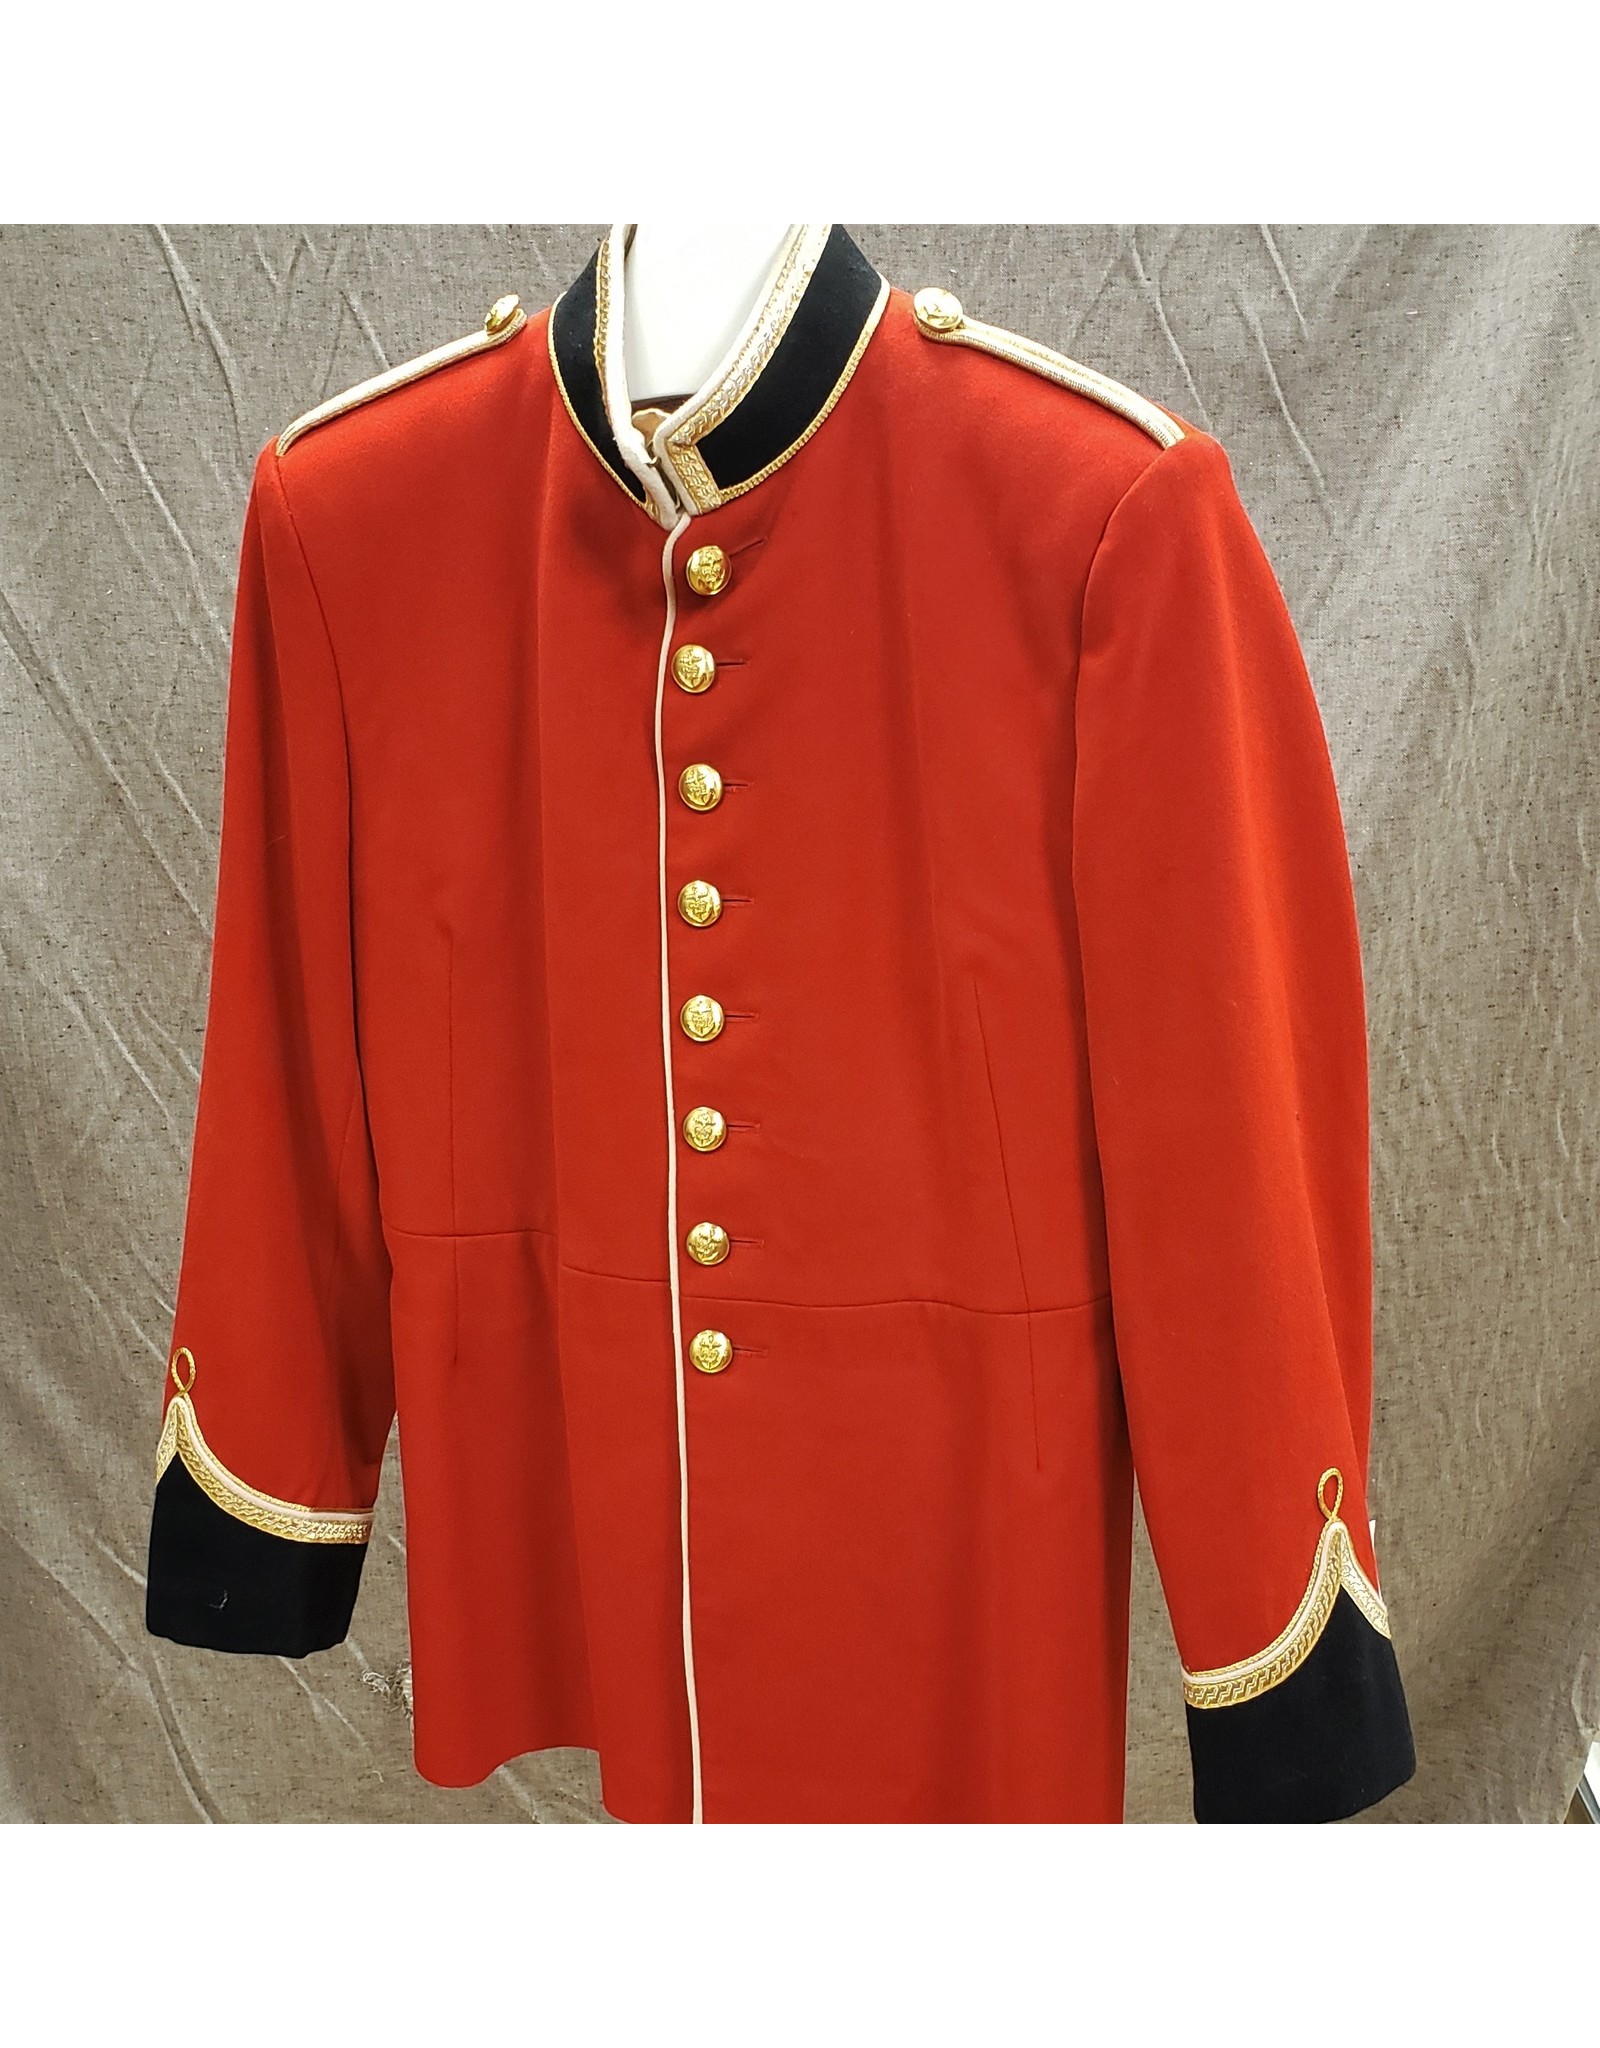 RMC ROYAL MILITARY COLLEGE RED DRESS TUNIC - Smith Army Surplus